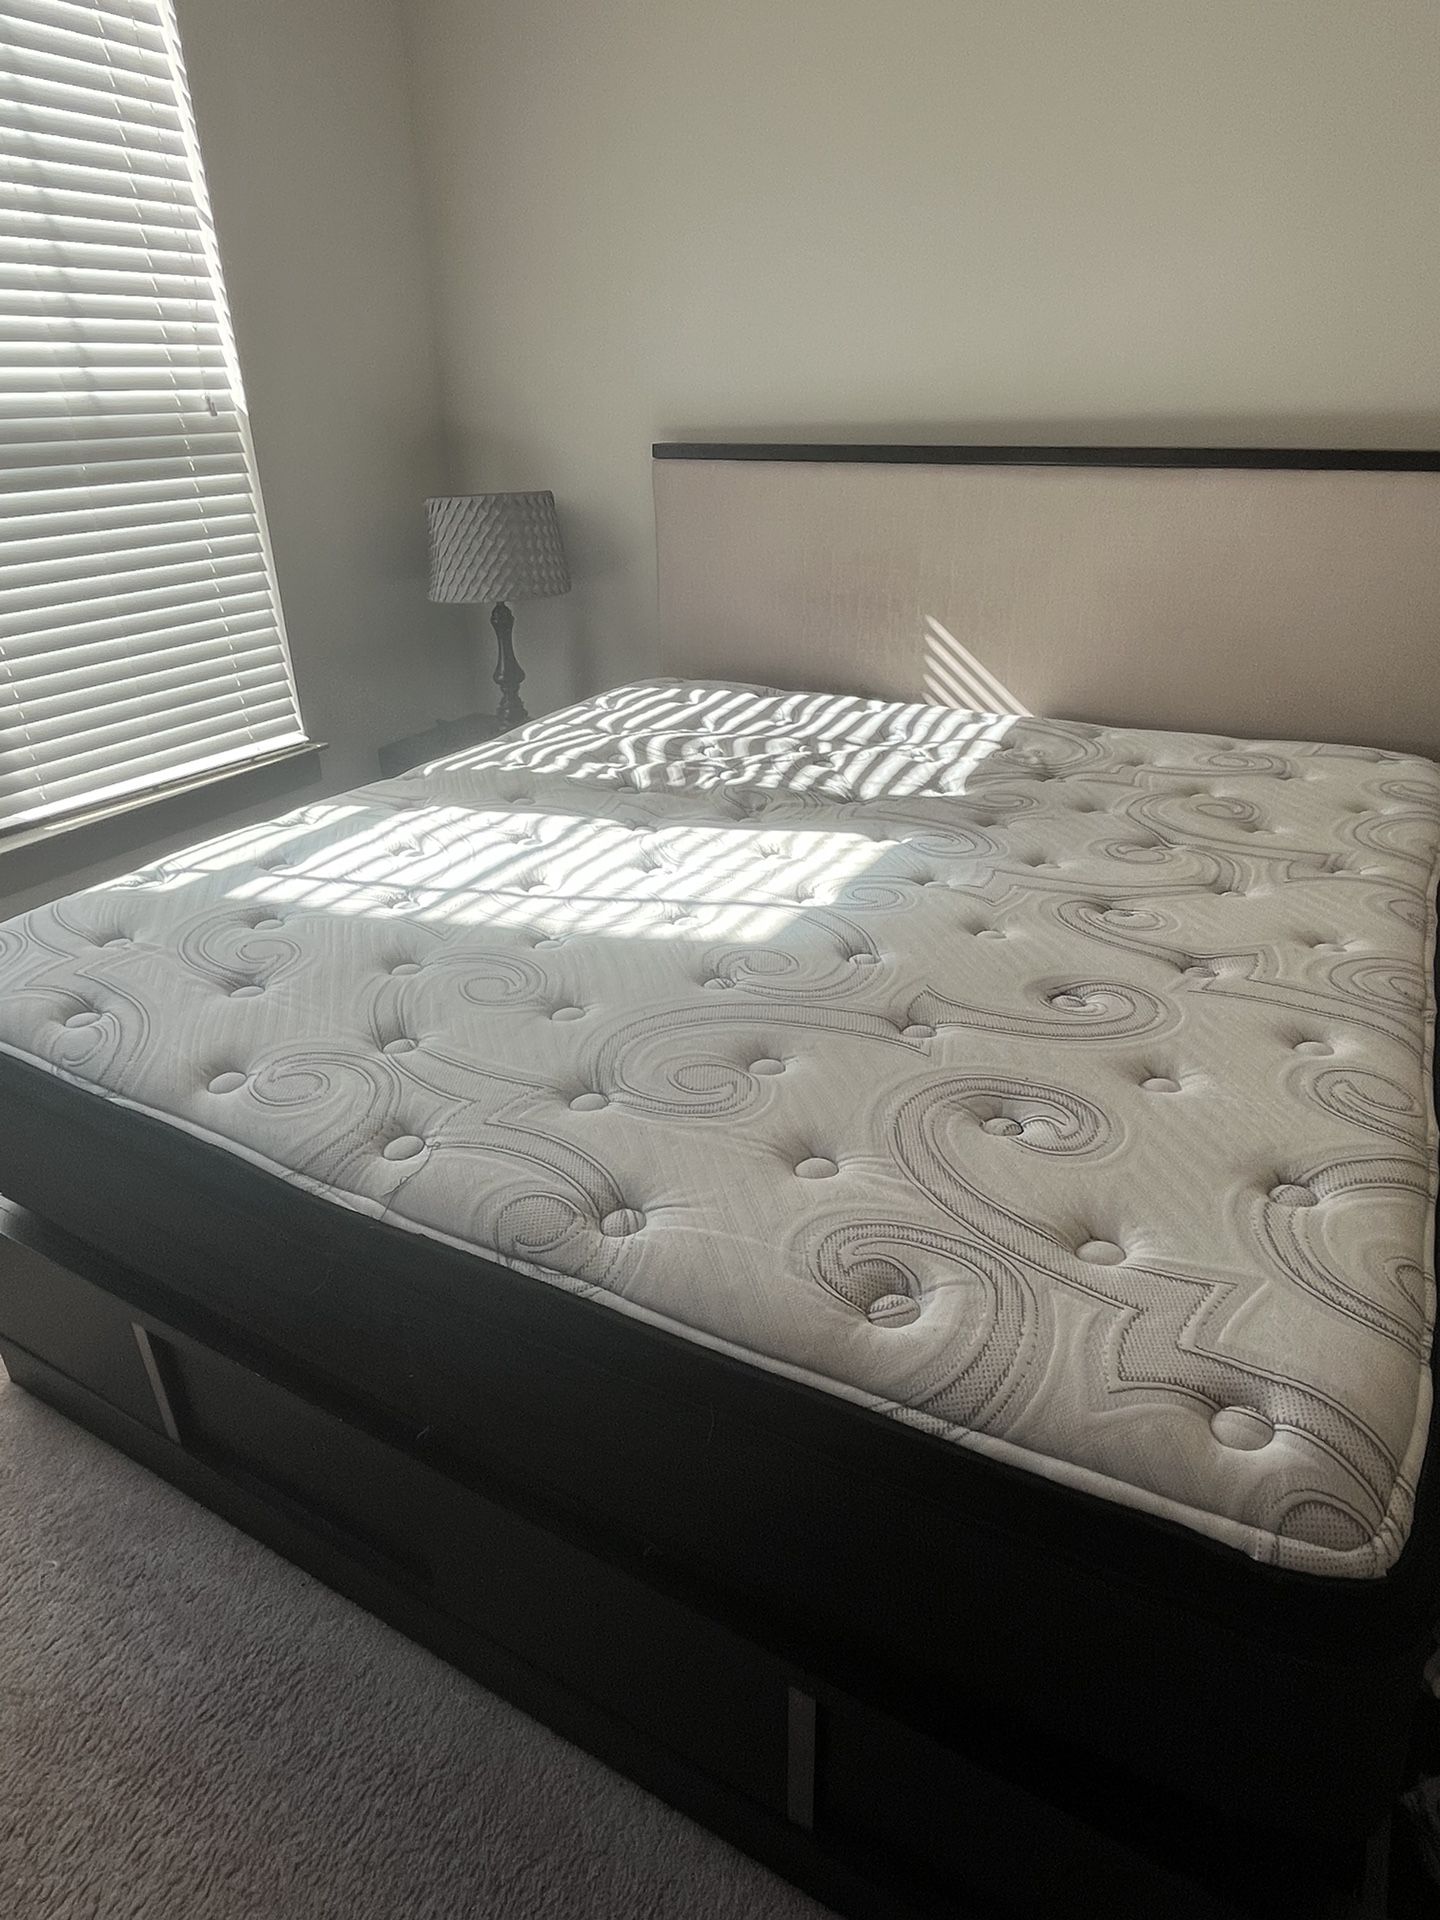 King Size Mattress/Bed Frame/Boxsprings  